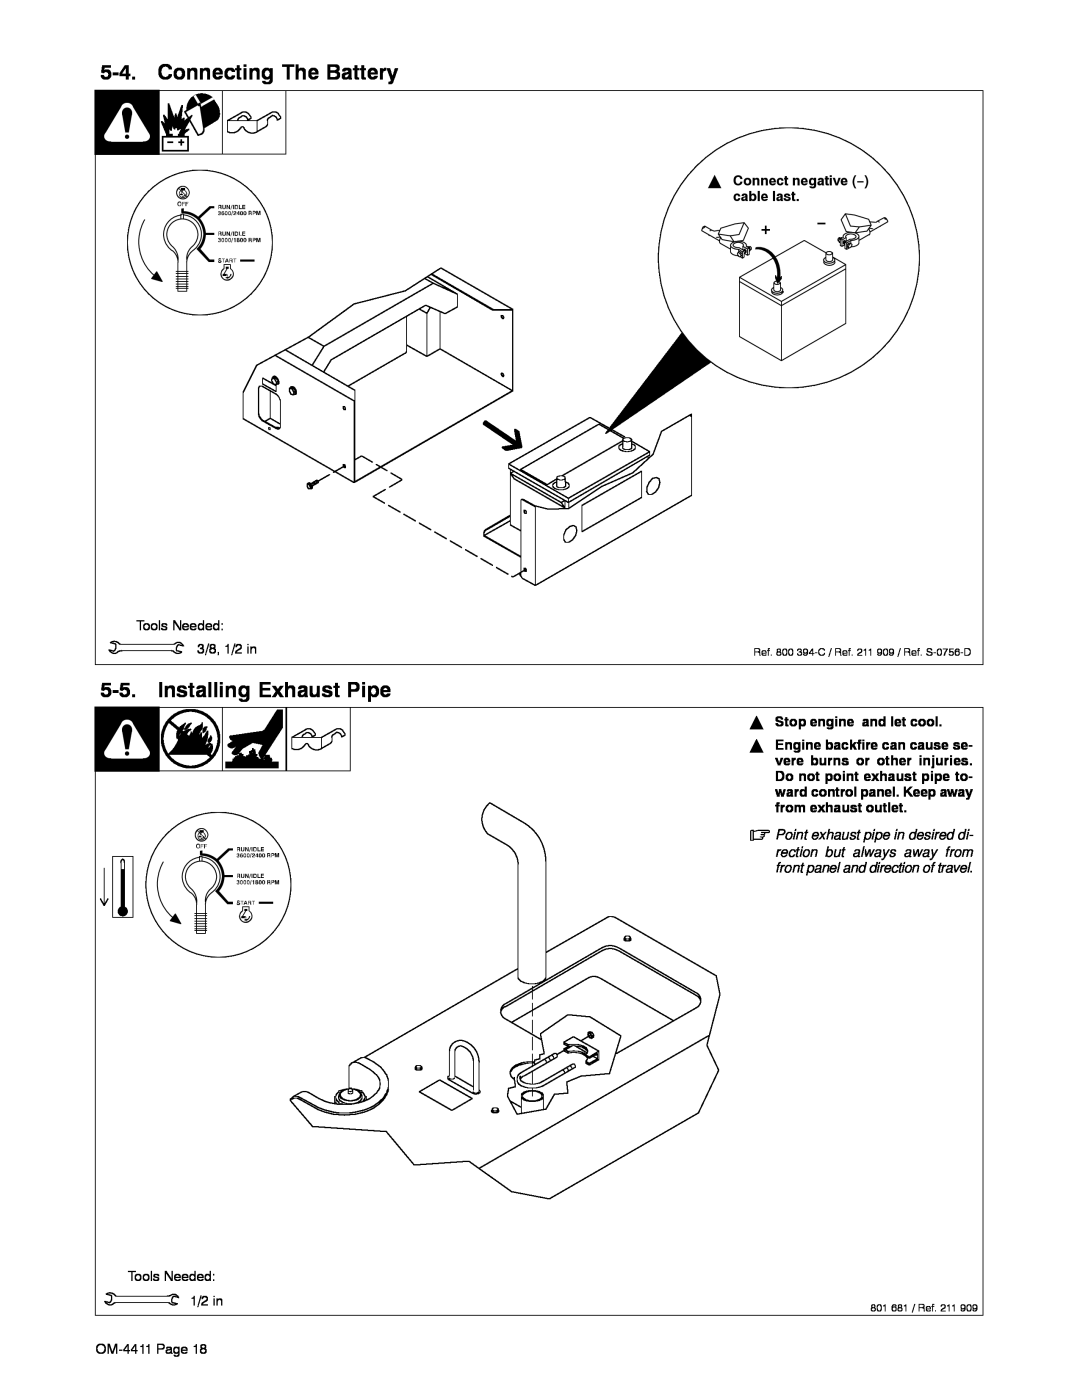 Miller Electric 301 G manual Connecting The Battery, Installing Exhaust Pipe, Y Connect negative − cable last 